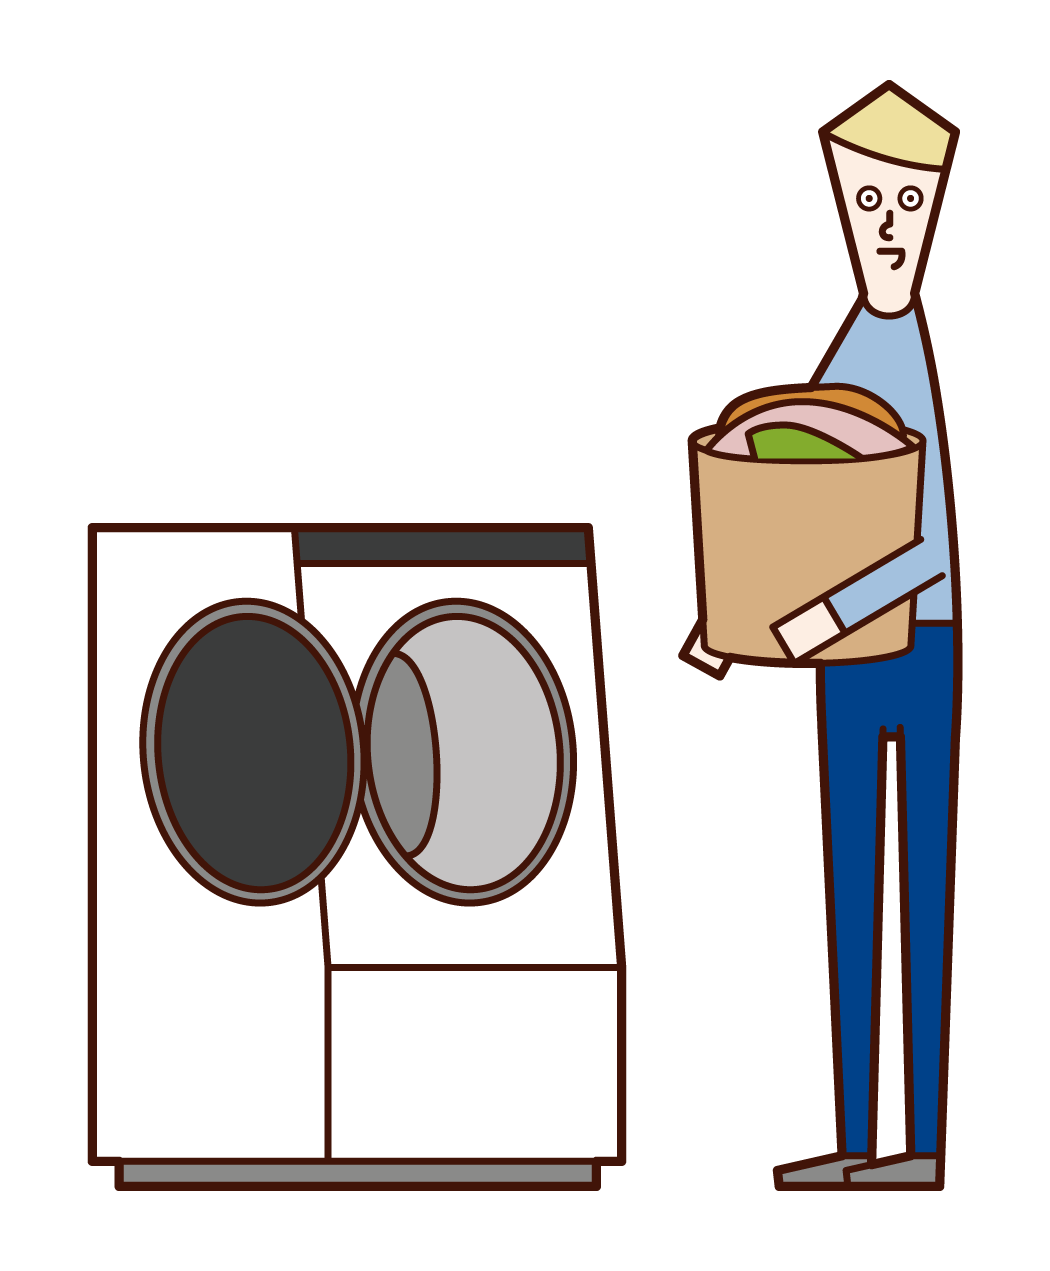 Illustration of a man doing laundry